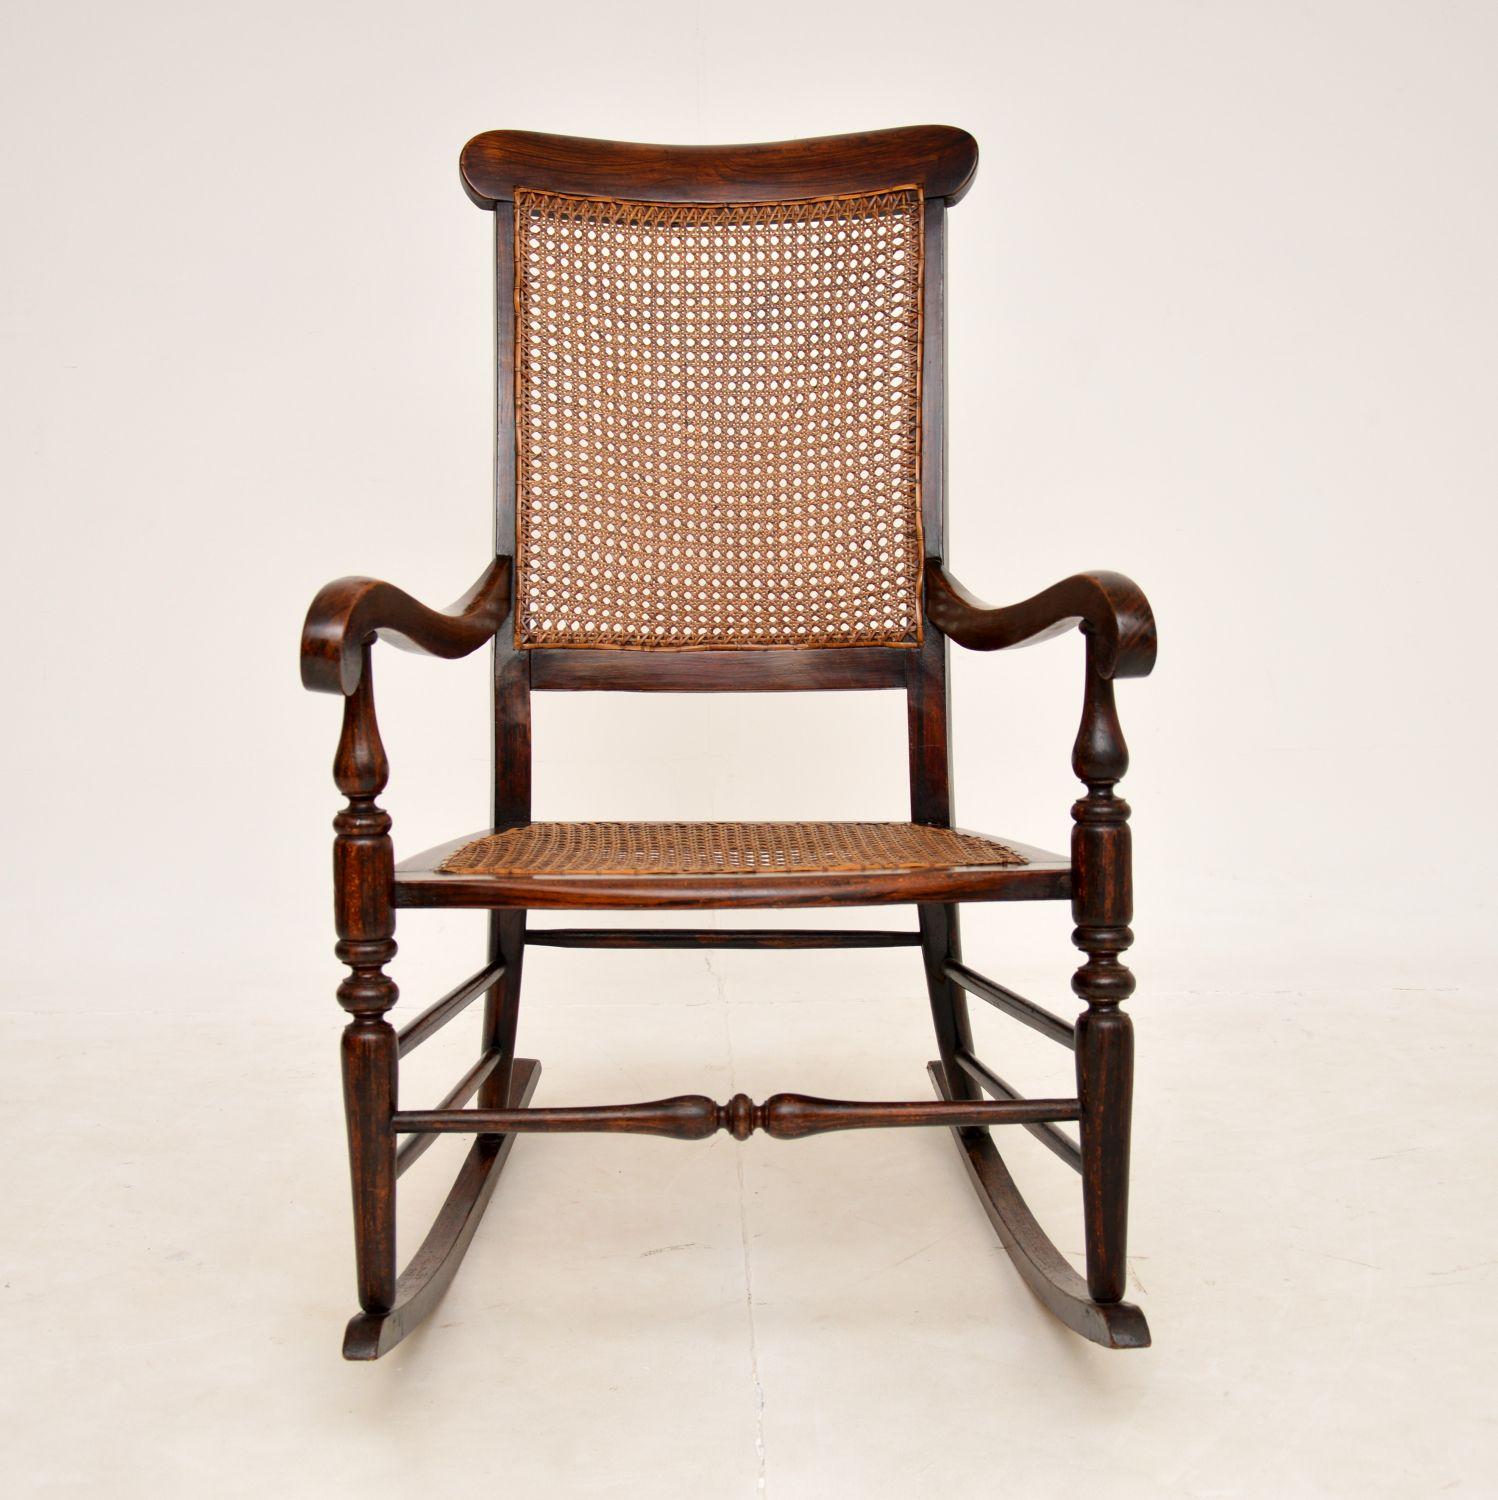 A beautiful original antique Victorian rocking chair, this was made in England and dates from around the 1860-1880 period.

It is very comfortable and of super quality. The frame appears to be oak or beech, and has been stained to simulate